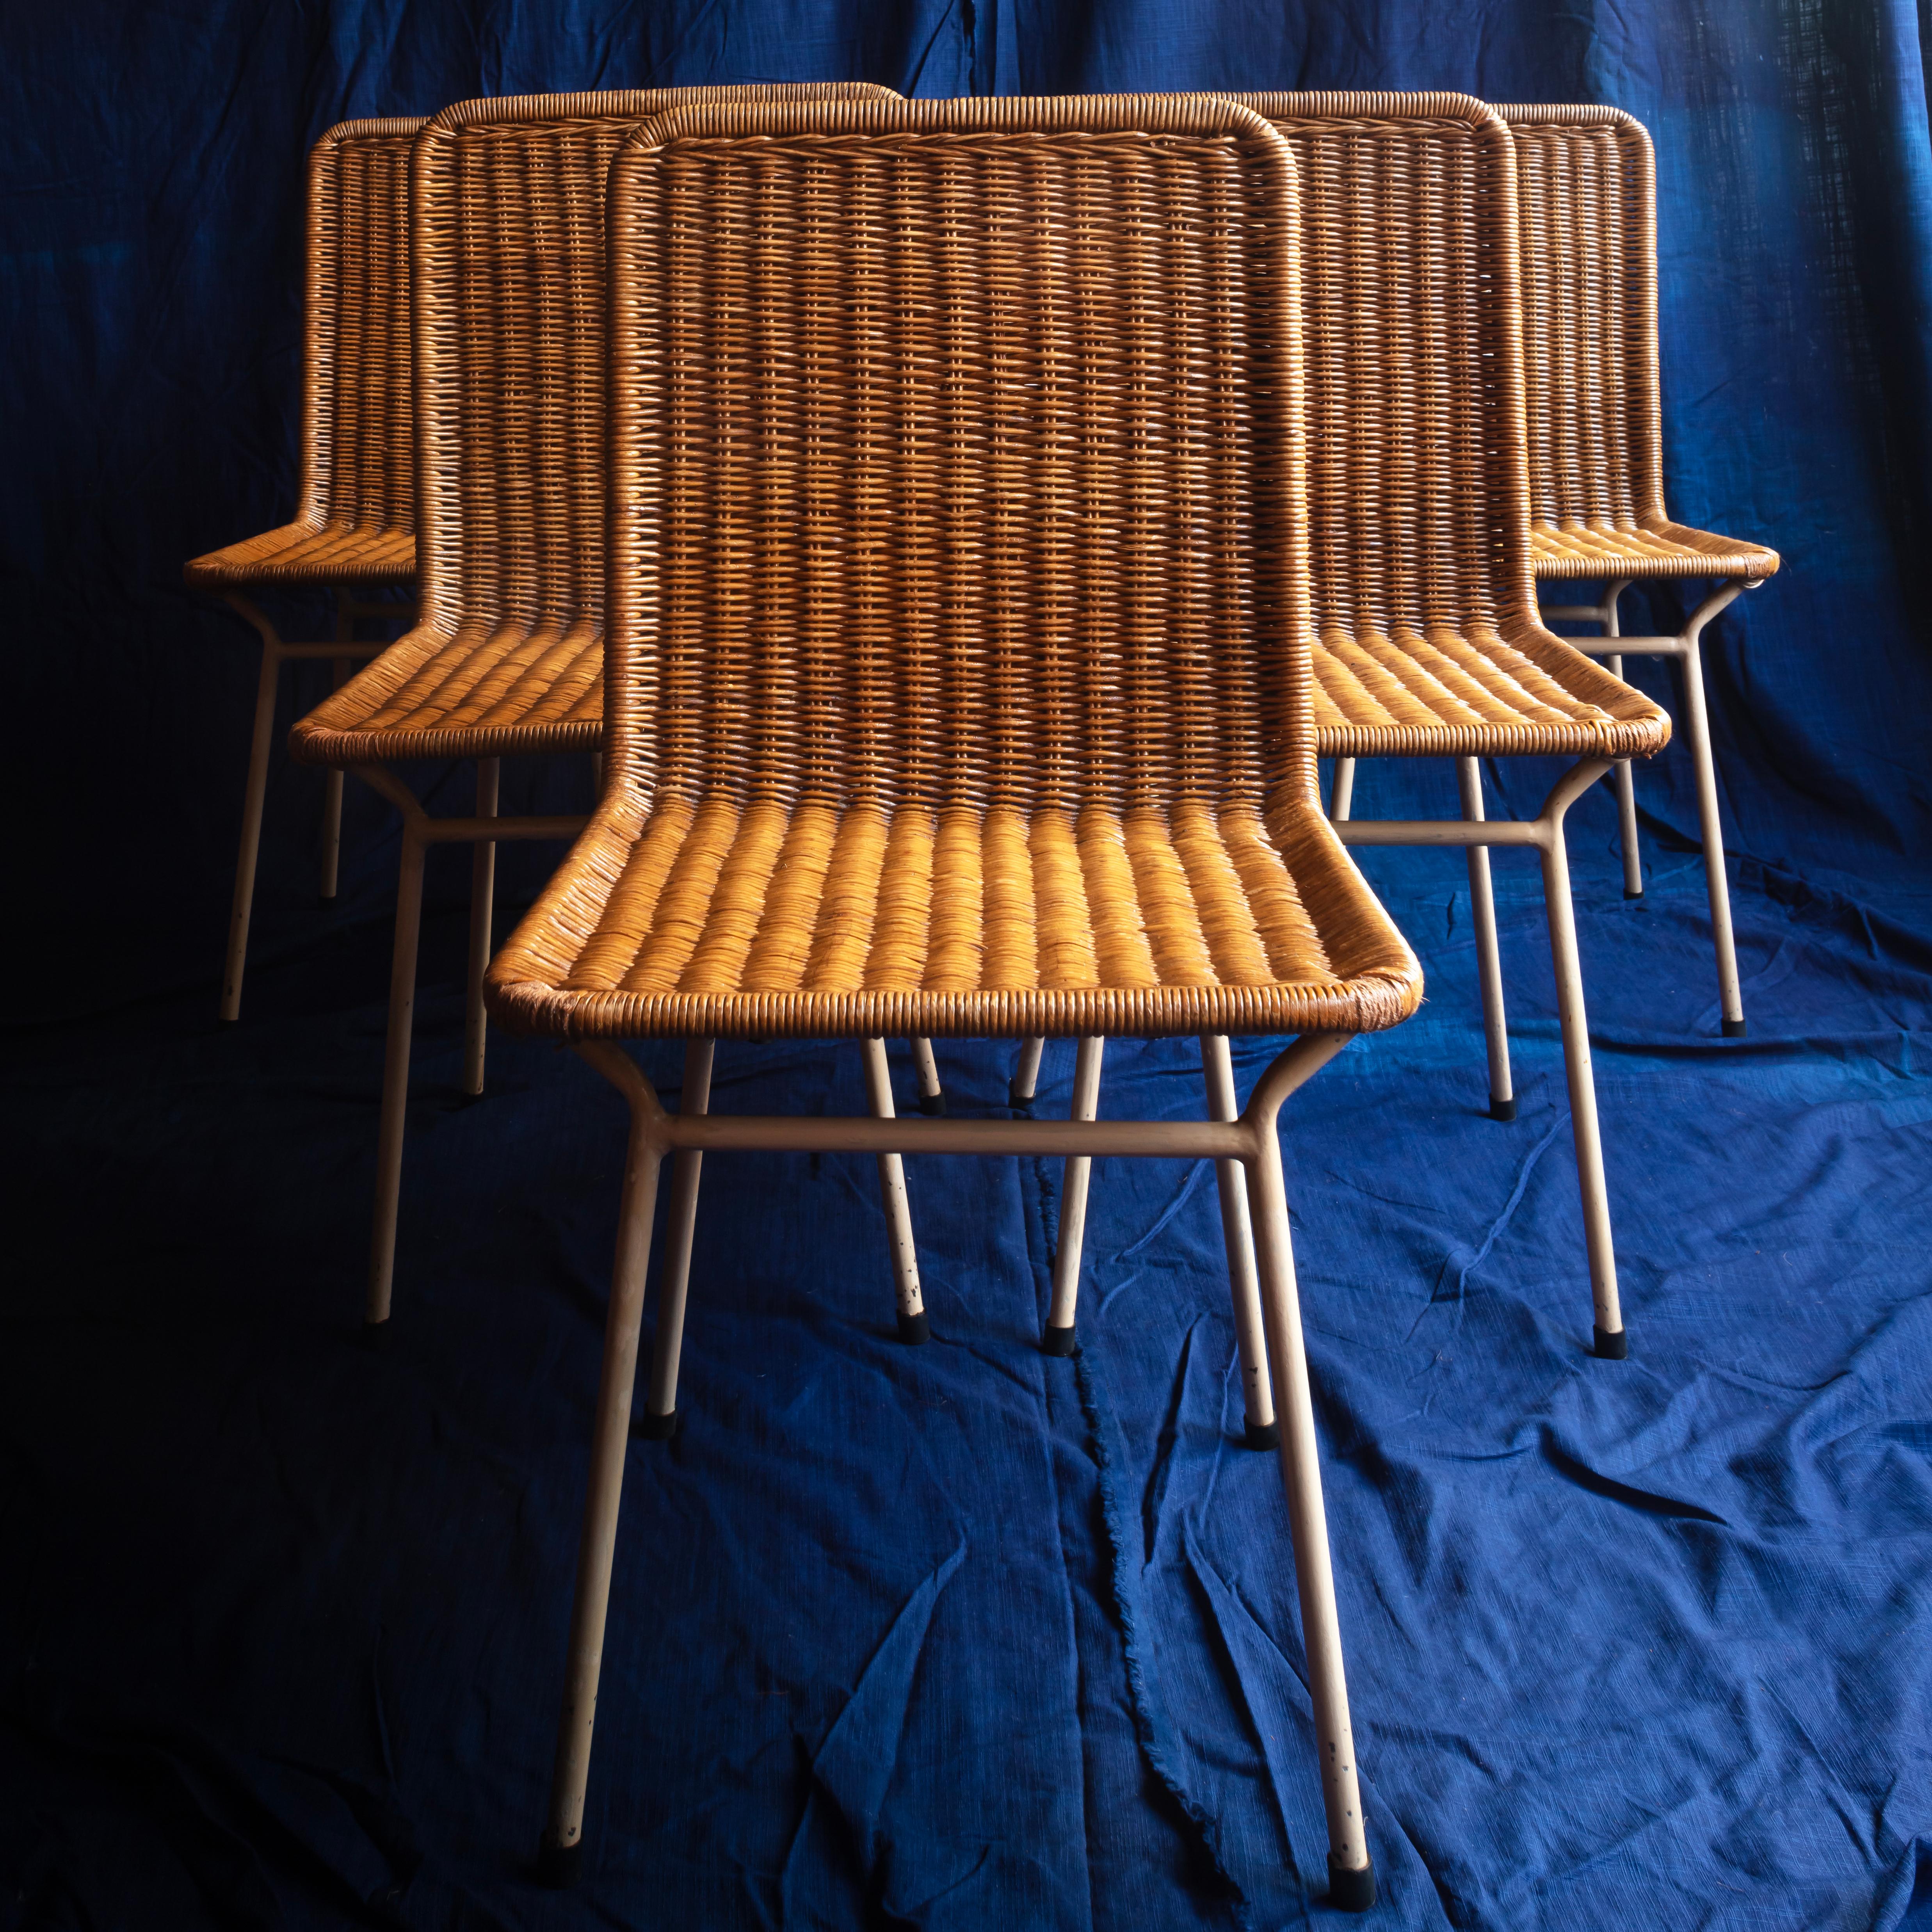 Enameled Set of 6 rattan chairs by Carlo Hauner, Brazilian, 1955 For Sale